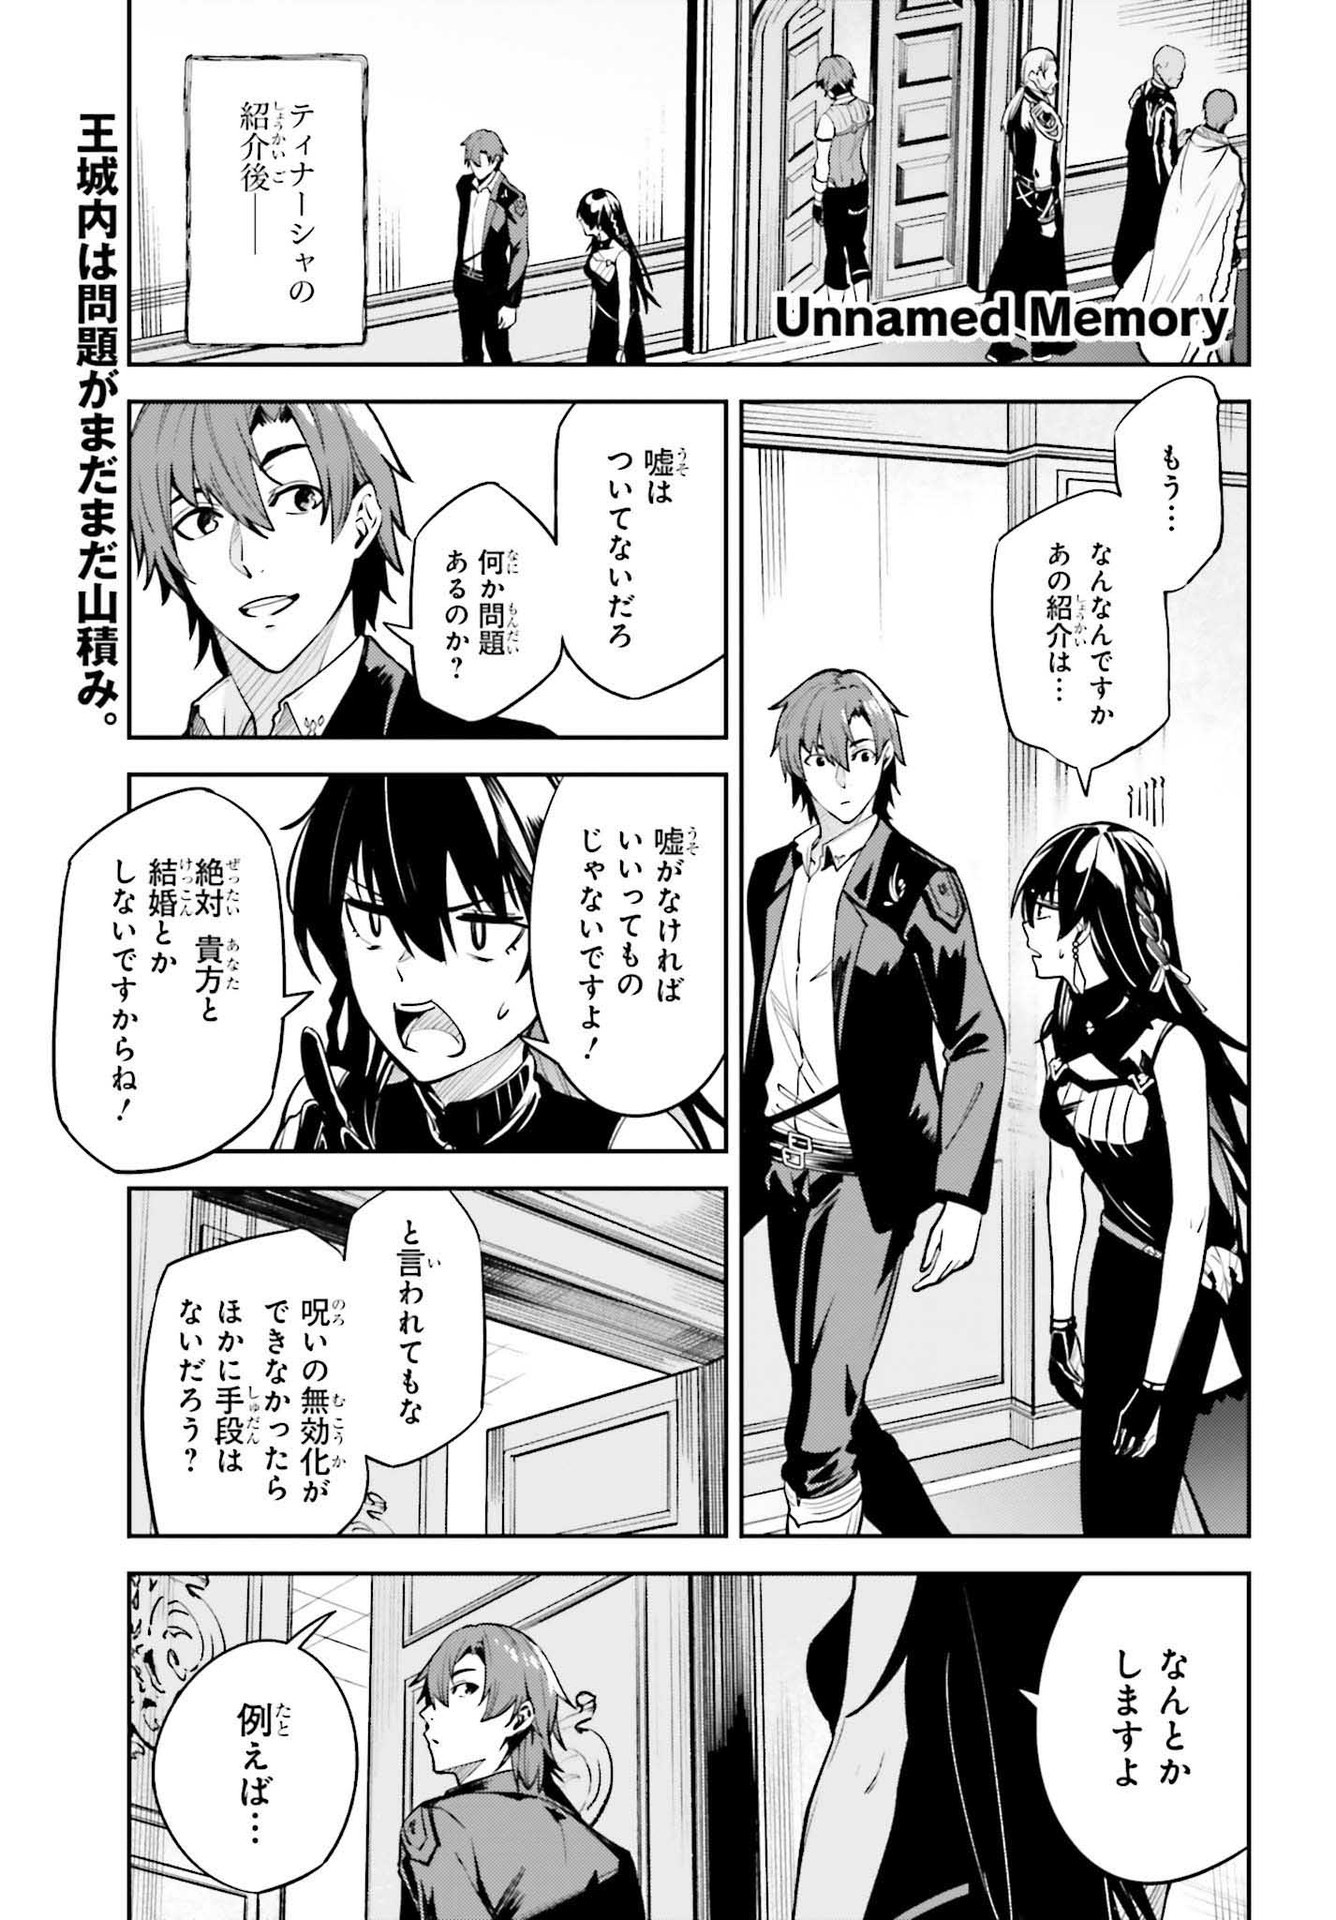 Unnamed Memory 第16話 - Page 1